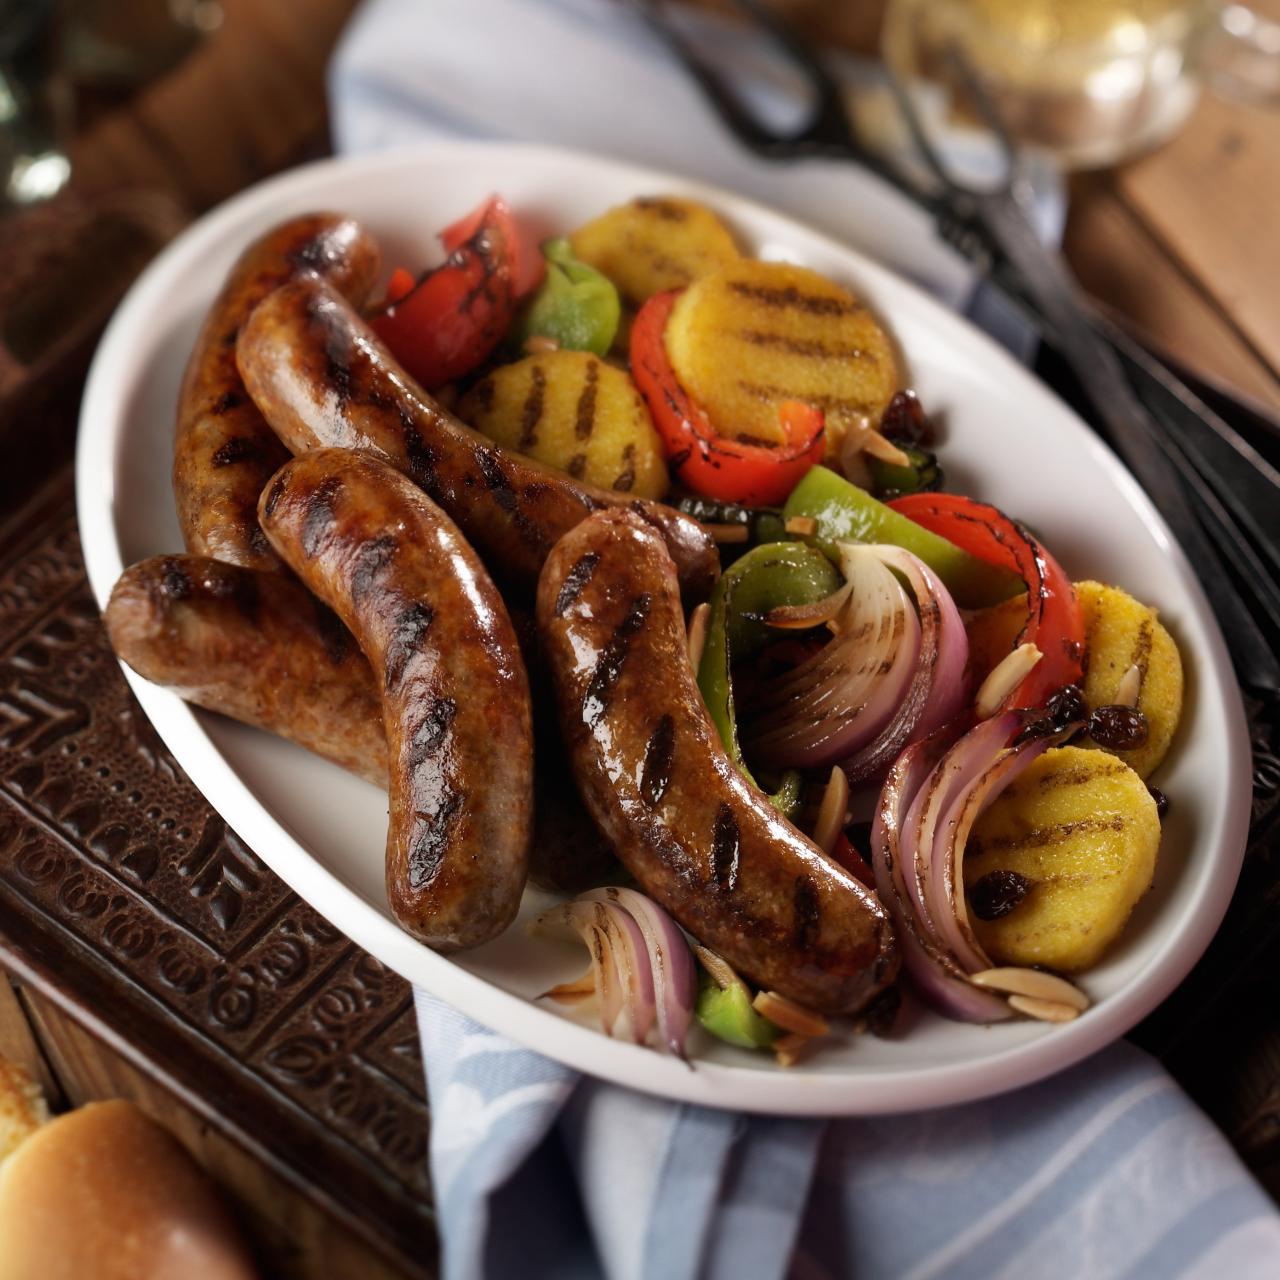 https://food.fnr.sndimg.com/content/dam/images/food/fullset/2011/10/21/0/RX-JOHNSONVILLE_Grilled-Italian-Sausage-with-Sweet-n-Sour-Peppers_s4x3.jpg.rend.hgtvcom.1280.1280.suffix/1389987544632.jpeg